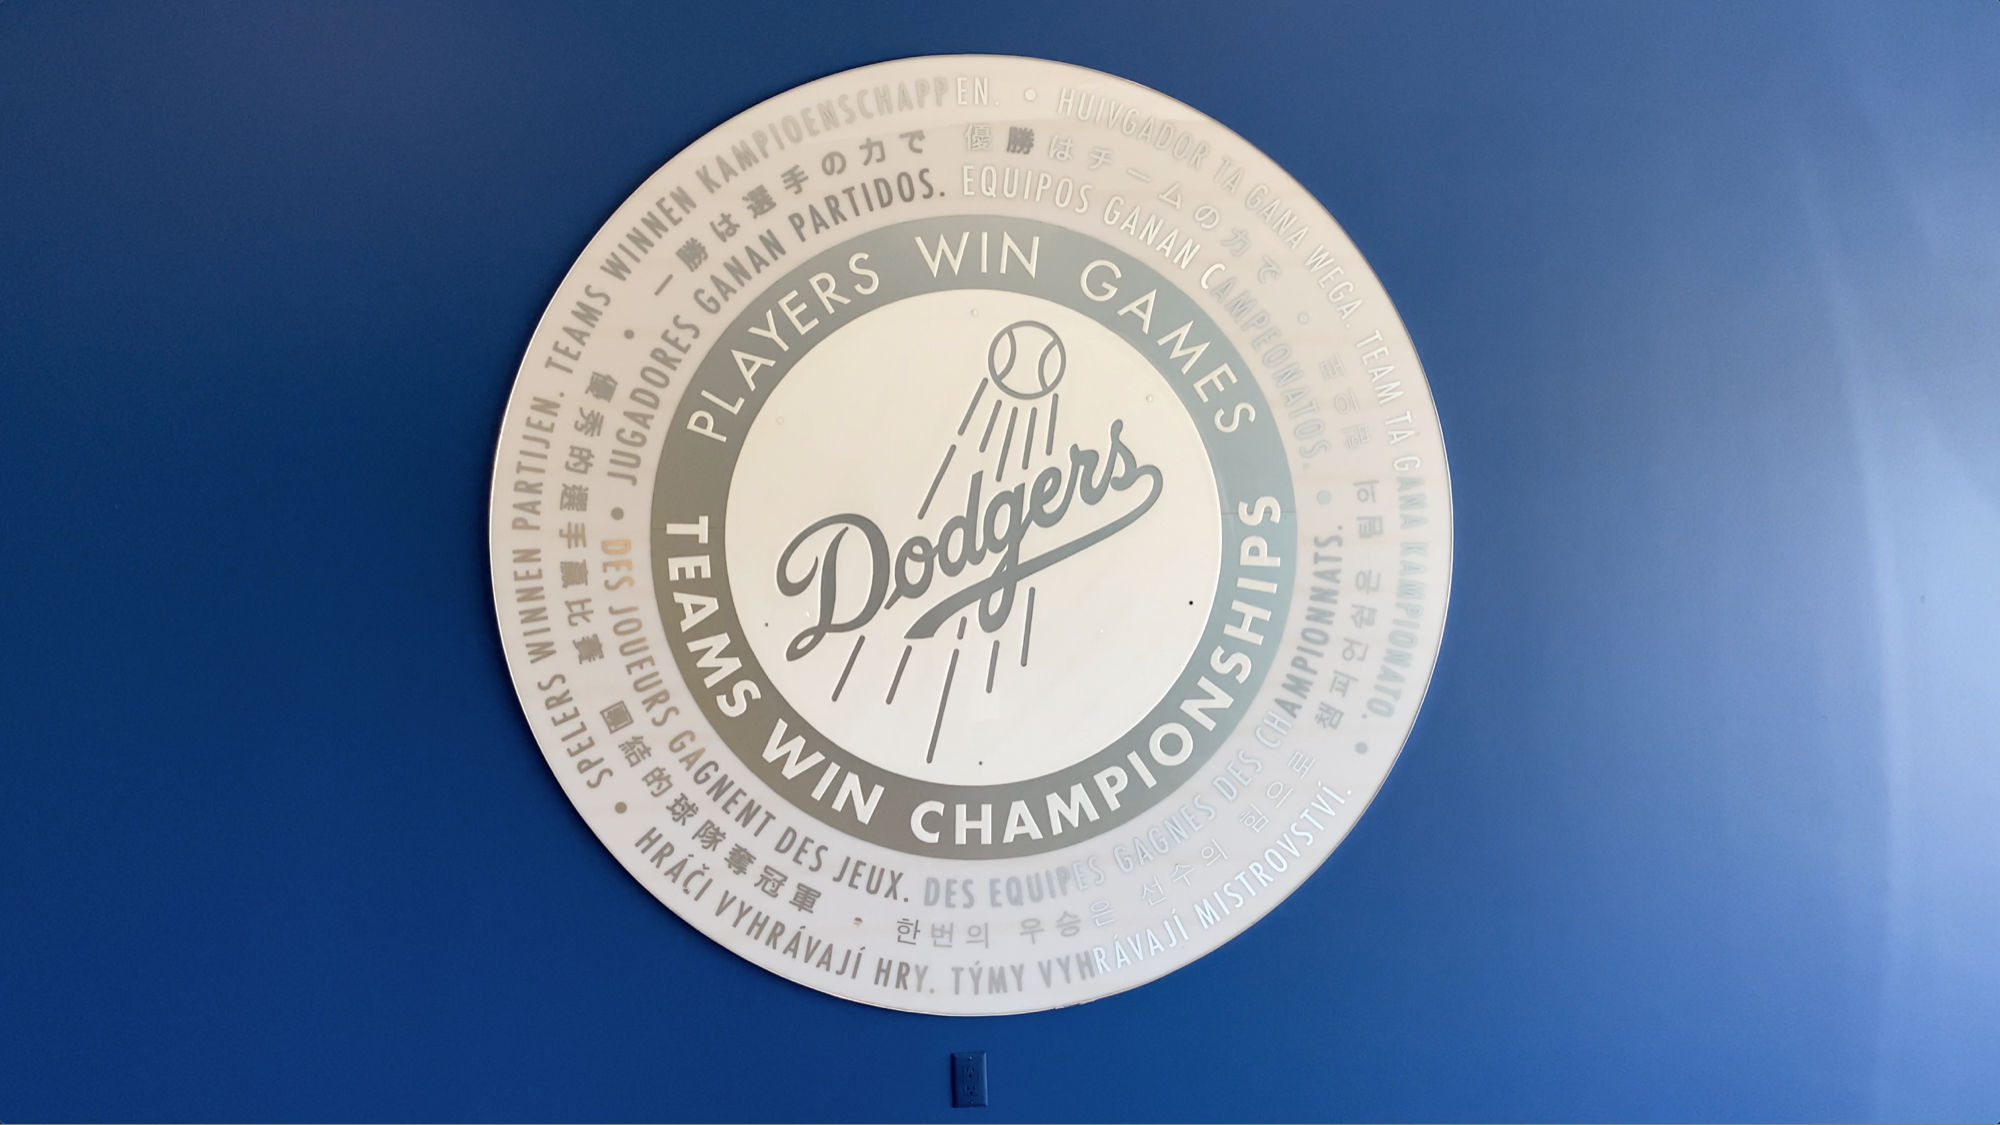 Dodgers Teams Win Championships